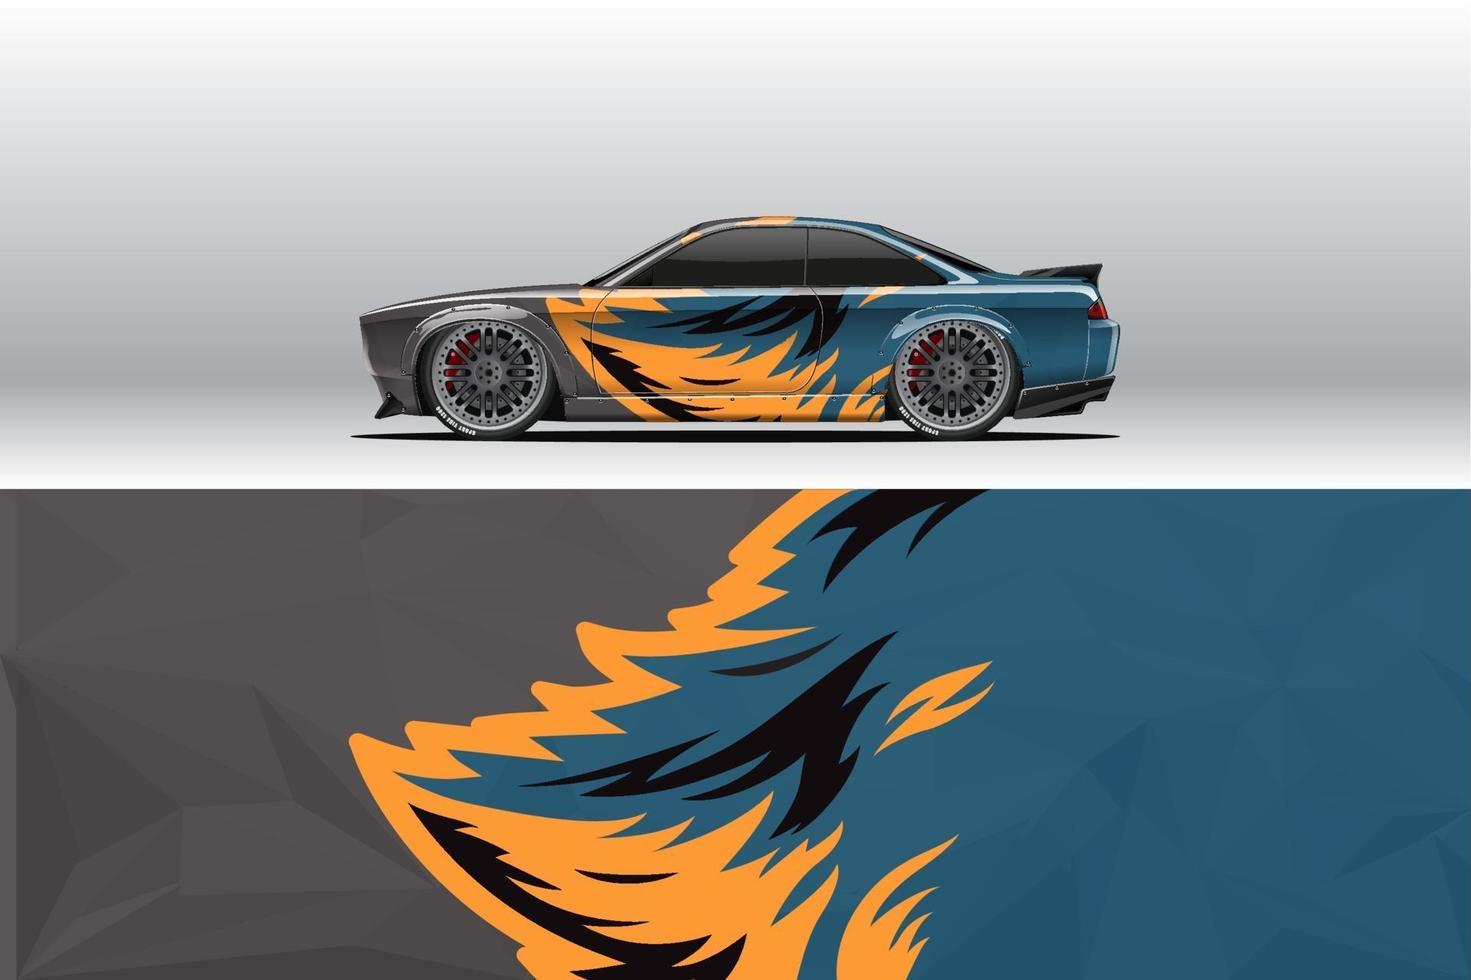 Car wrap decal designs.  for racing livery or daily car vinyl sticker vector